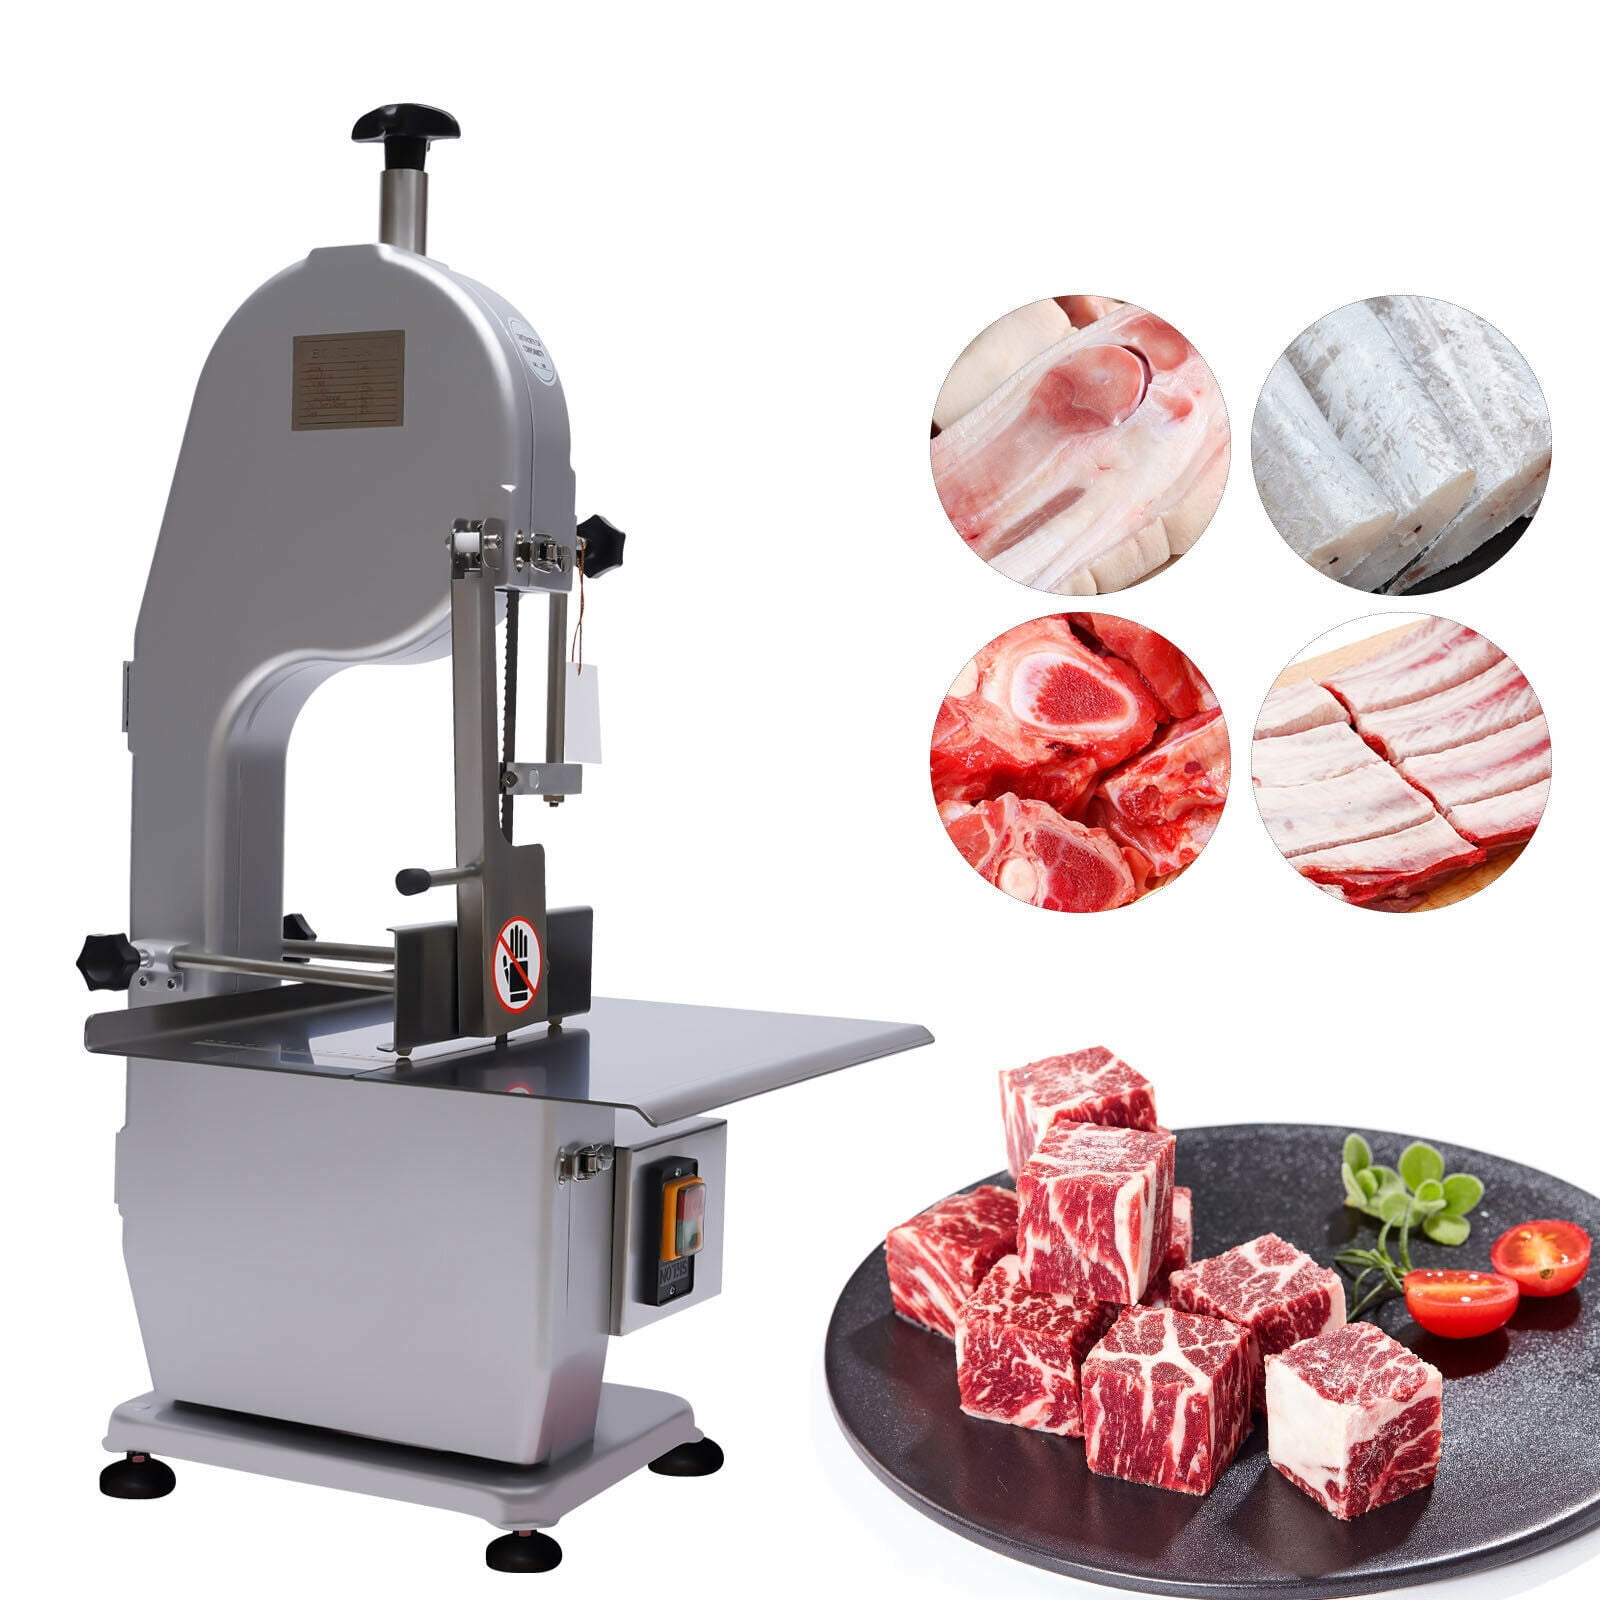 Miumaeov Manual Frozen Meat Slicer, Stainless Steel Meat Cutter, Bone  Cutter Manual Ribs Chopper for Fish Chicken Beef Frozen Meat Home Cooking